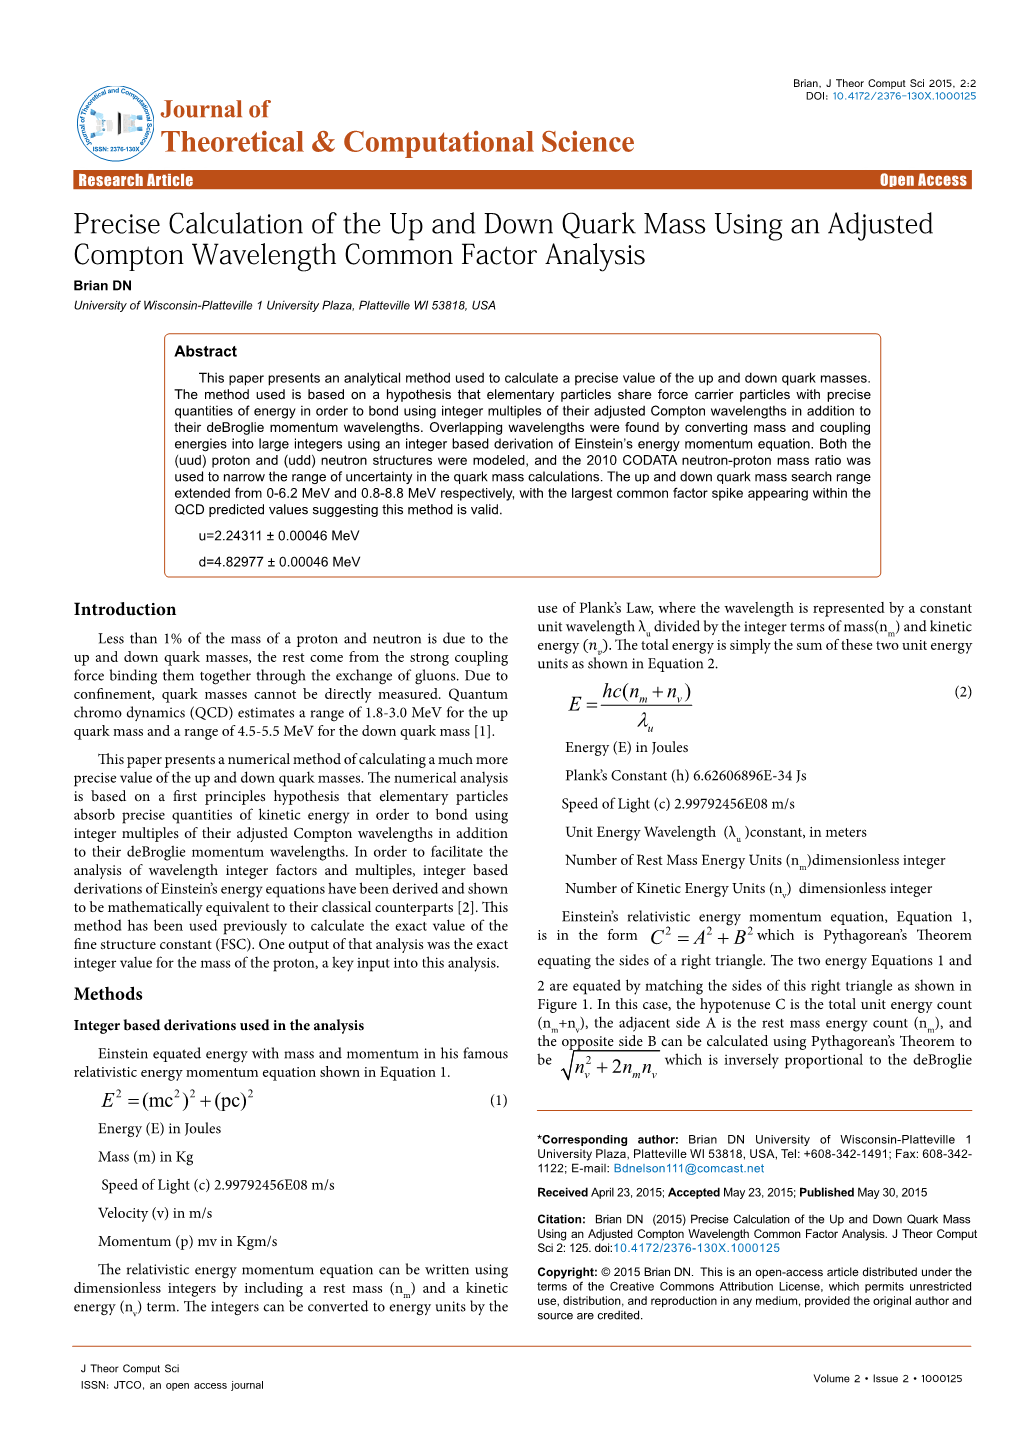 (2015) Precise Calculation of the up and Down Quark Mass Using an Adjusted Compton Wavelength Common Factor Analysis